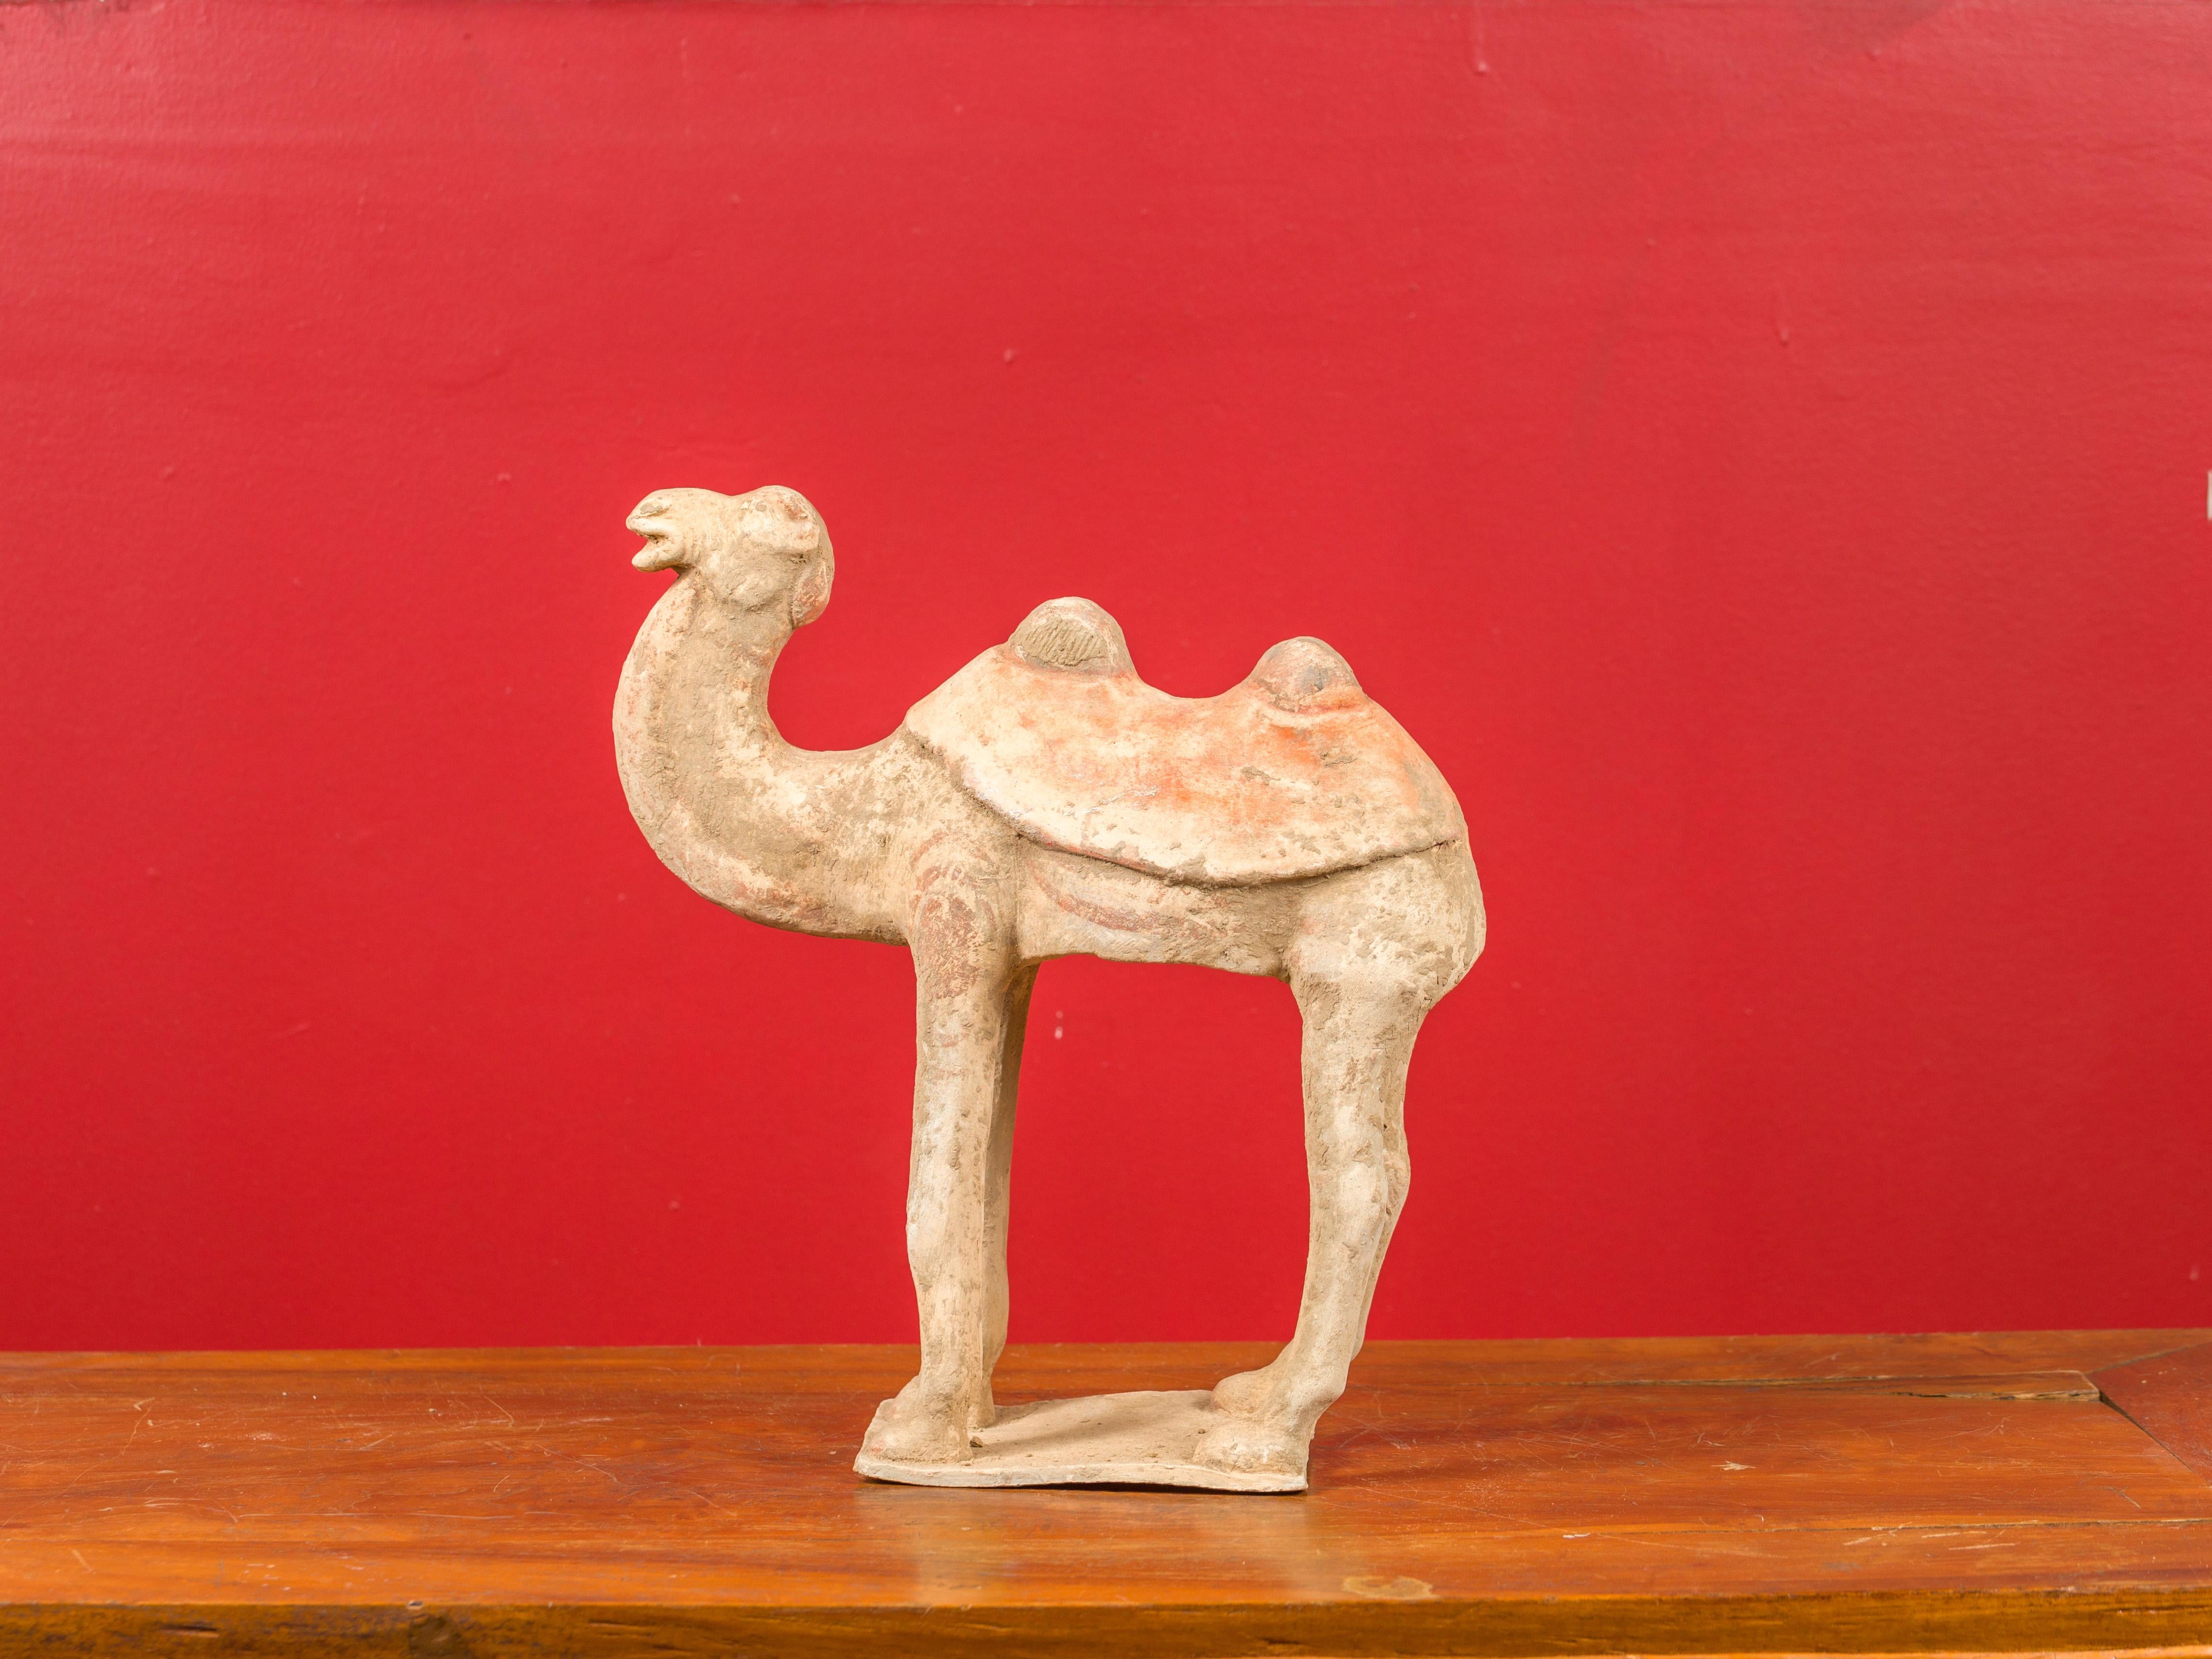 Chinese Han Dynasty 202 BC-200 AD Mingqi Terracotta Camel with Original Paint 4